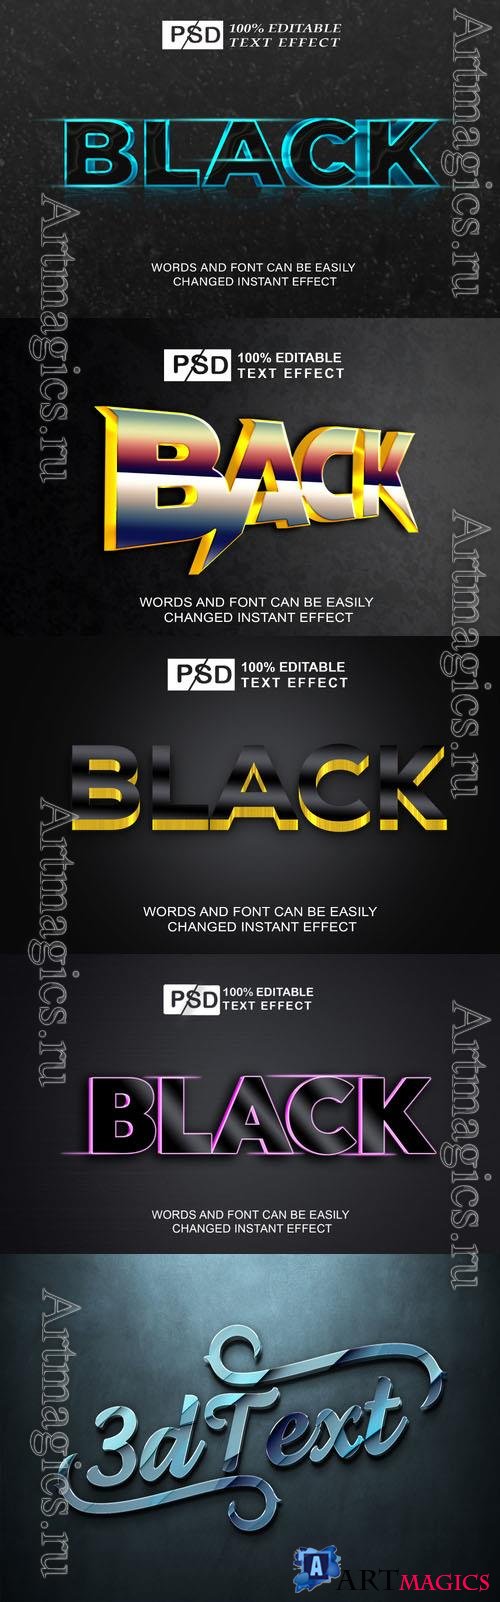 Psd style text effect editable collection vol 336